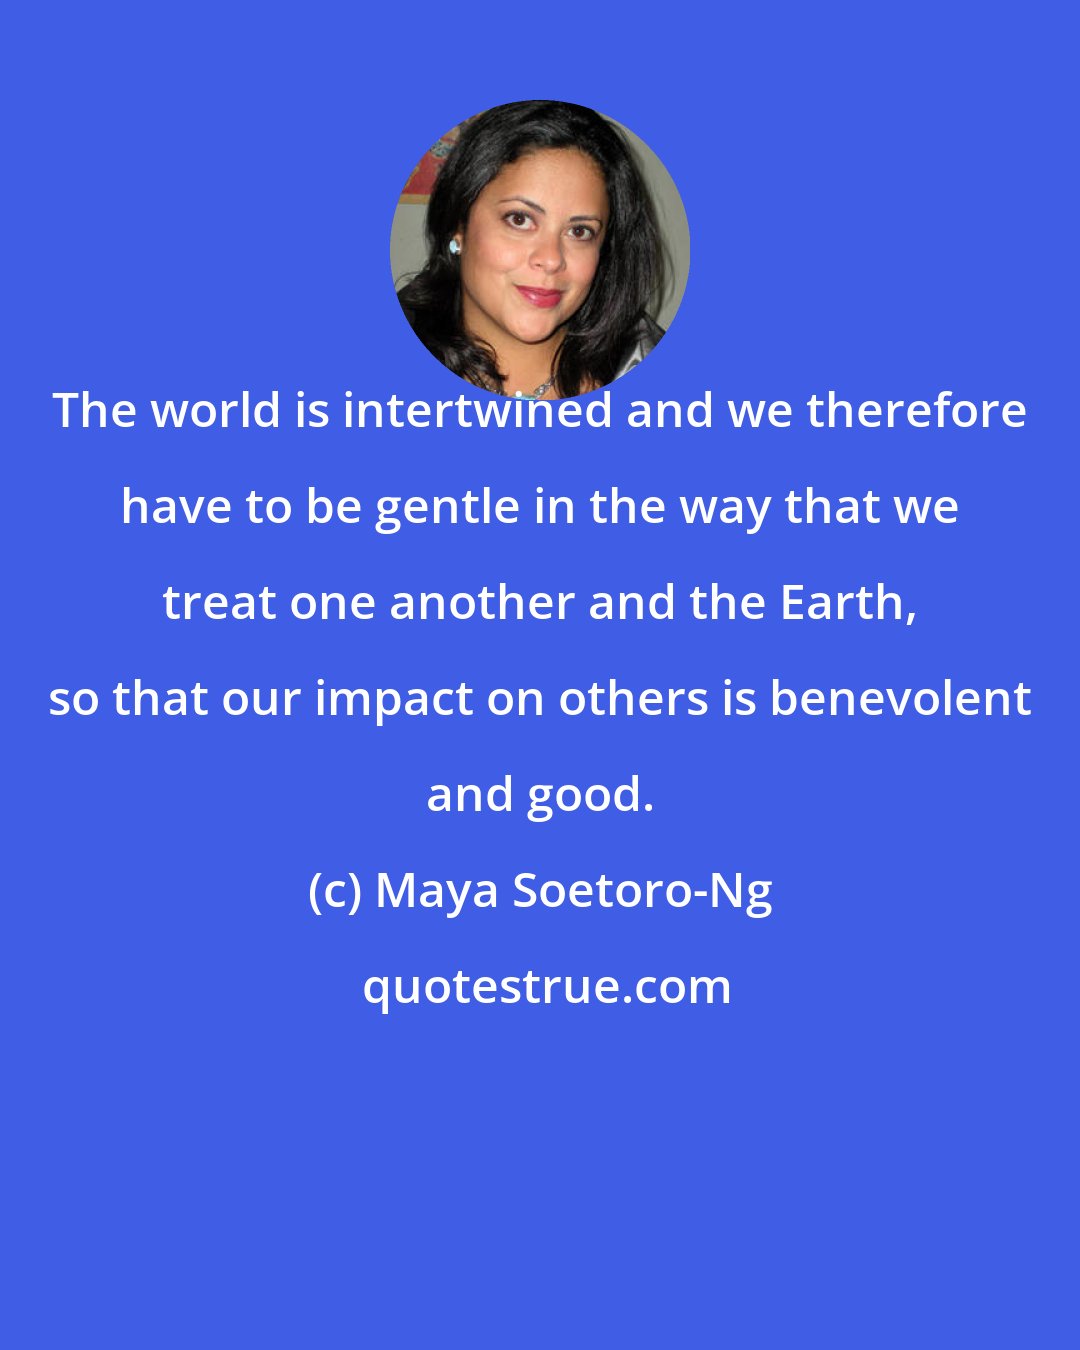 Maya Soetoro-Ng: The world is intertwined and we therefore have to be gentle in the way that we treat one another and the Earth, so that our impact on others is benevolent and good.